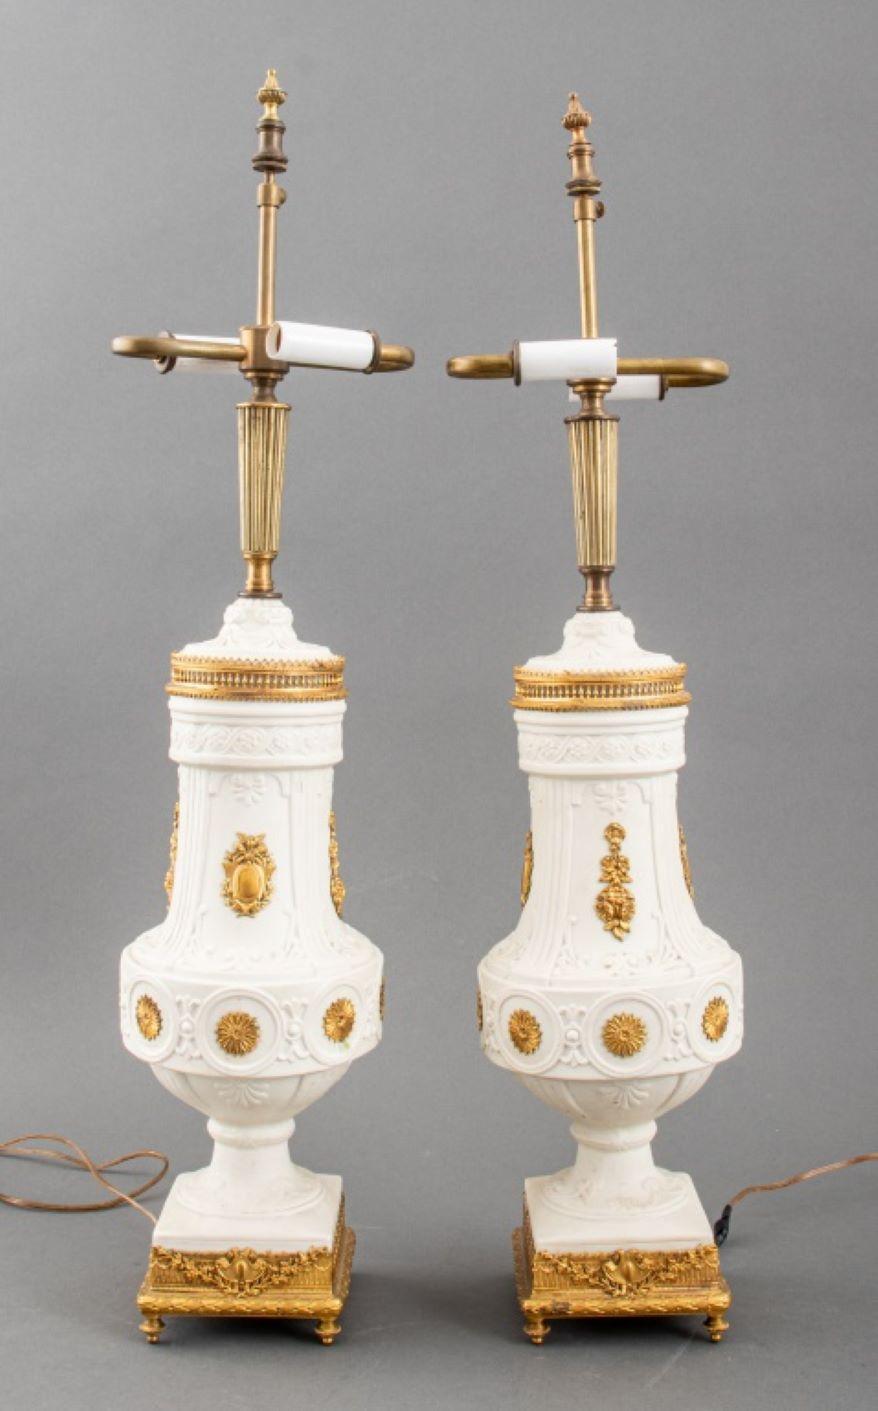 Pair of Louis XVI Style Parian and Gilt Metal Mounted Table Lamps, with impressed model numbers 